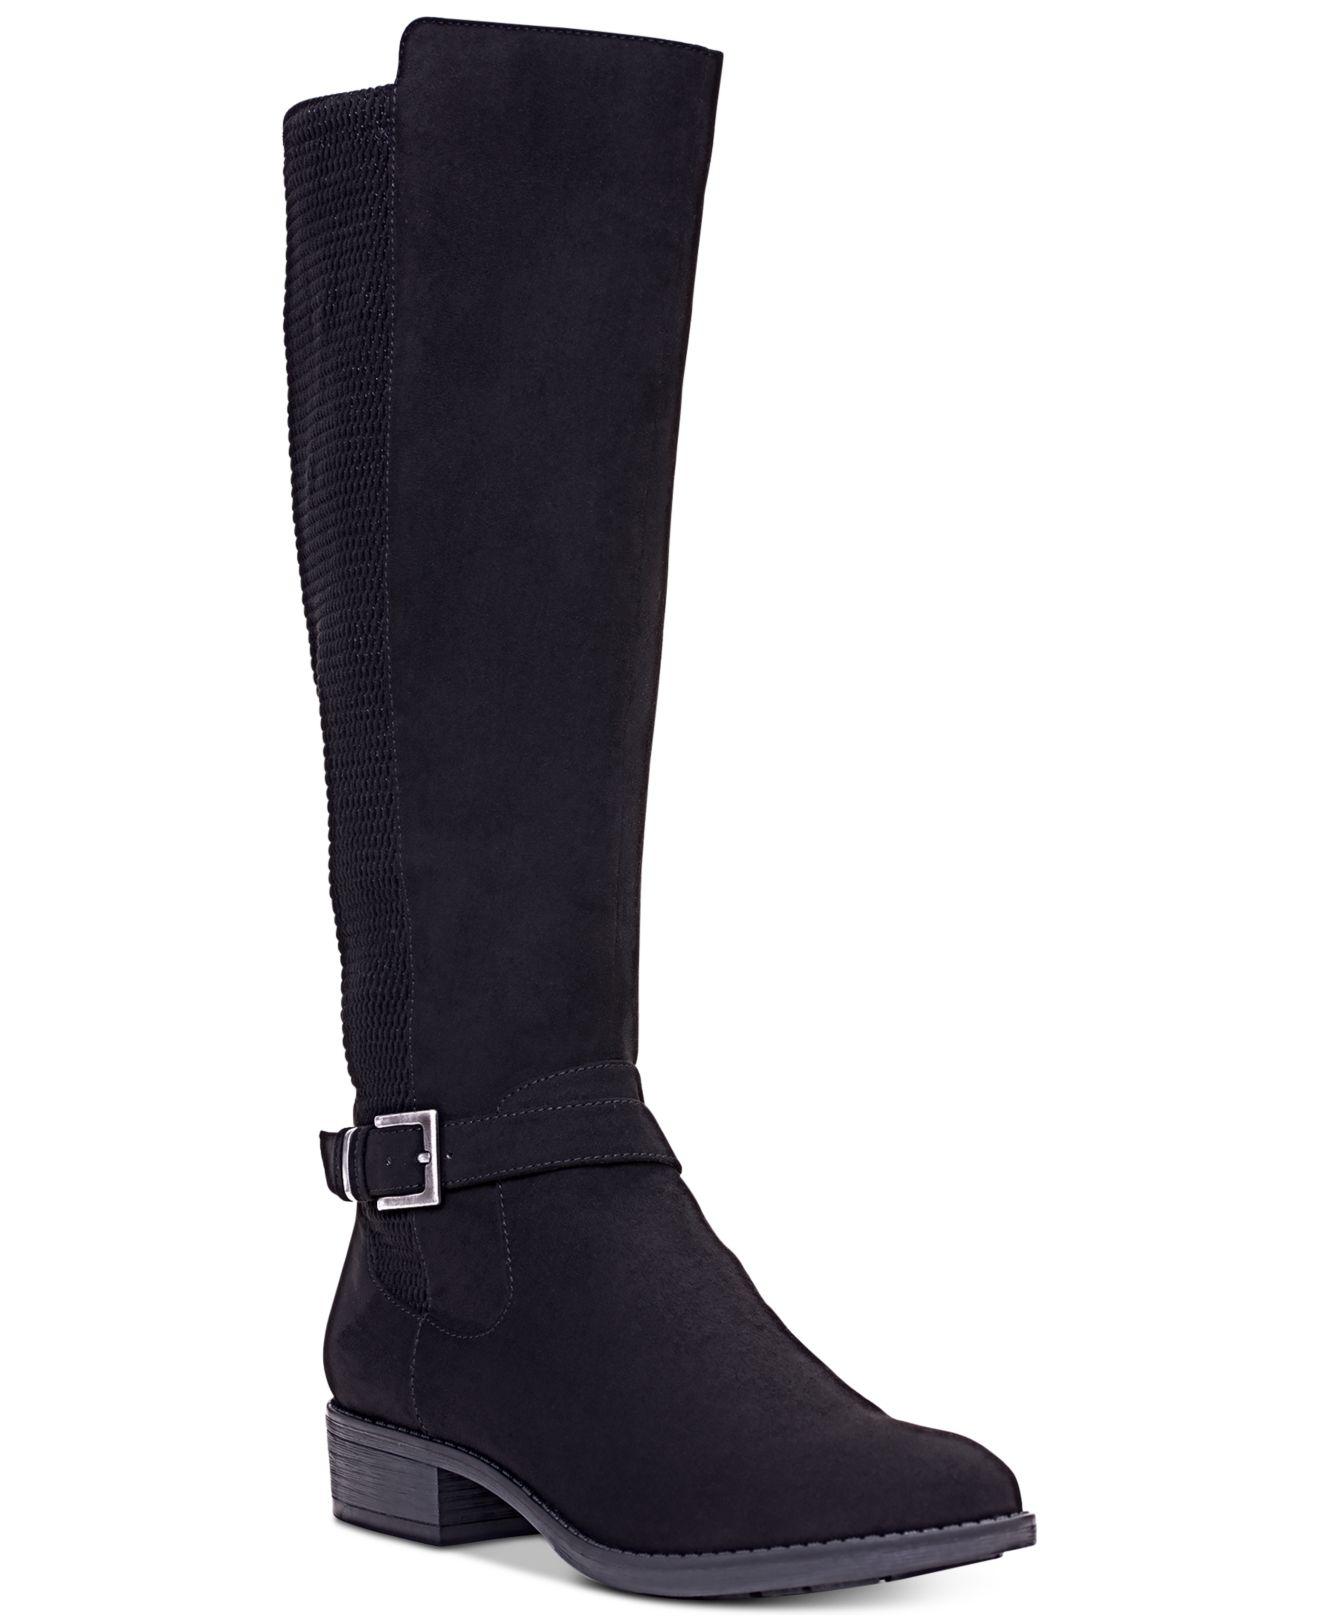 Style \u0026 Co. Luciaa Riding Boots in 